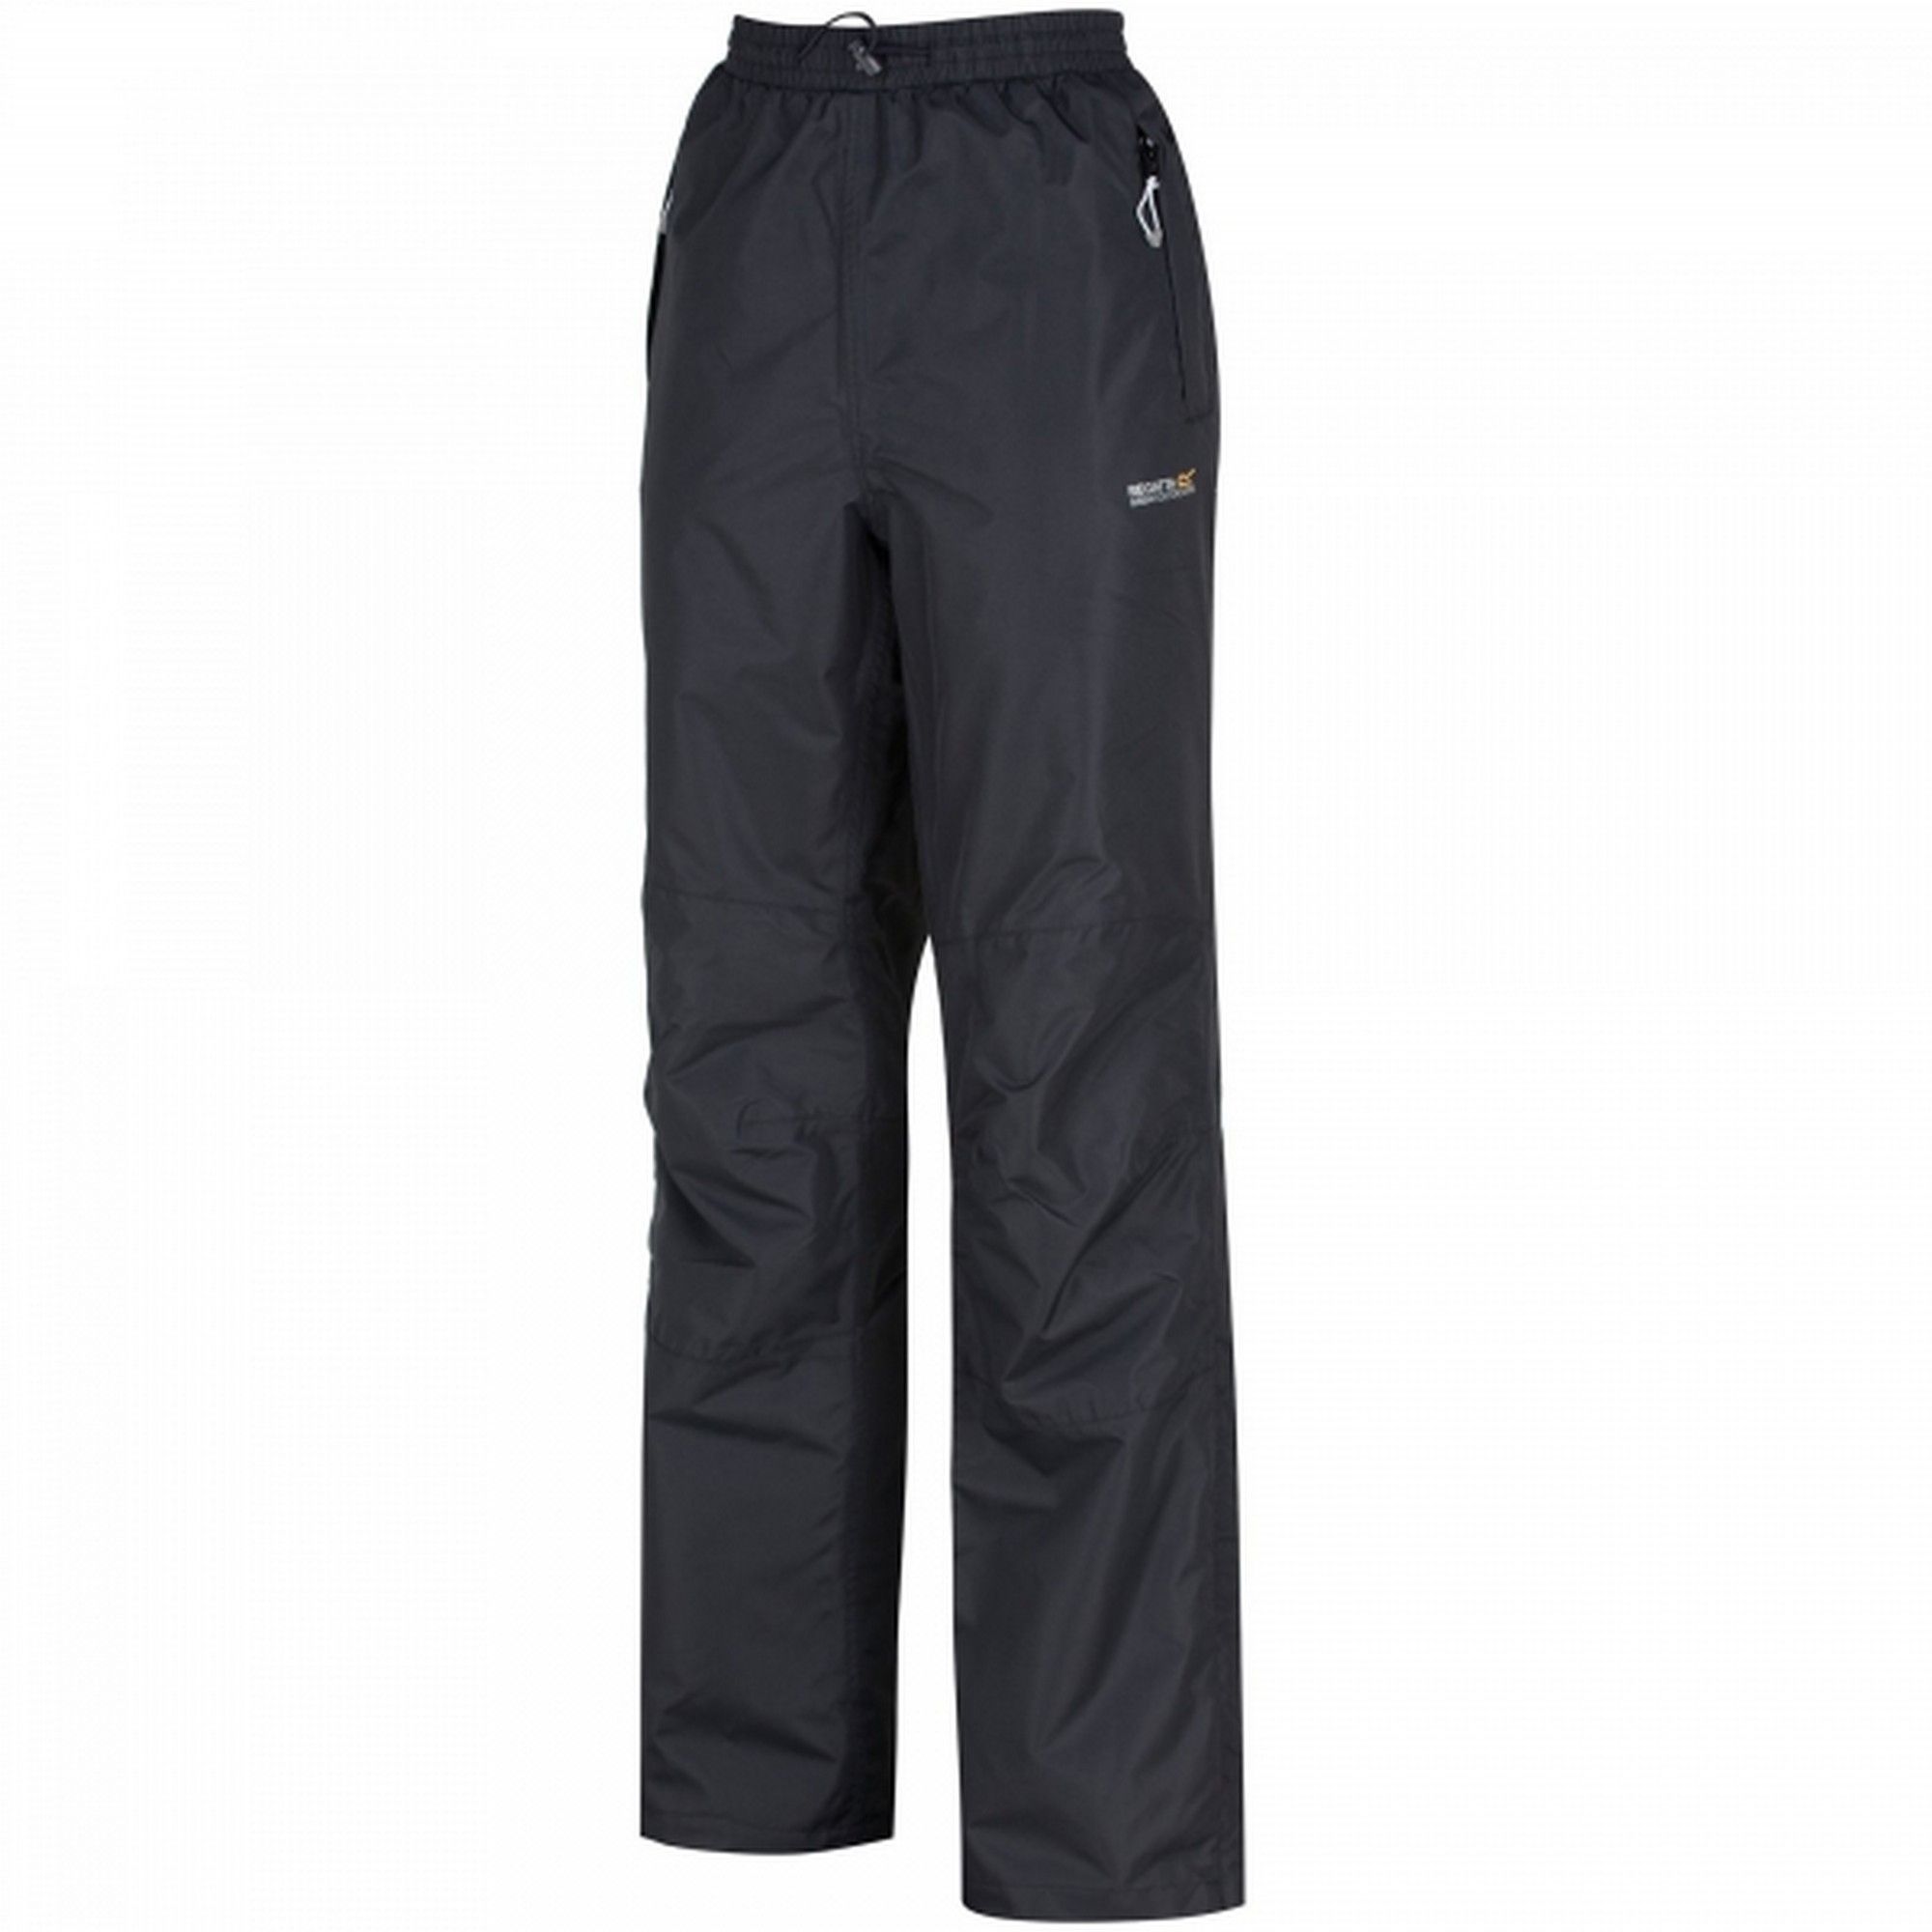 Womens waterproof trousers made of Isotex 5000 coated Polyester fabric. Durable water repellent finish. Part mesh, part Polyester lining. Taped seams. Elasticated and drawcord waist. Zip opening at ankle. Ideal for wearing outdoors in the rain. 100% Polyester. Short: 29in.